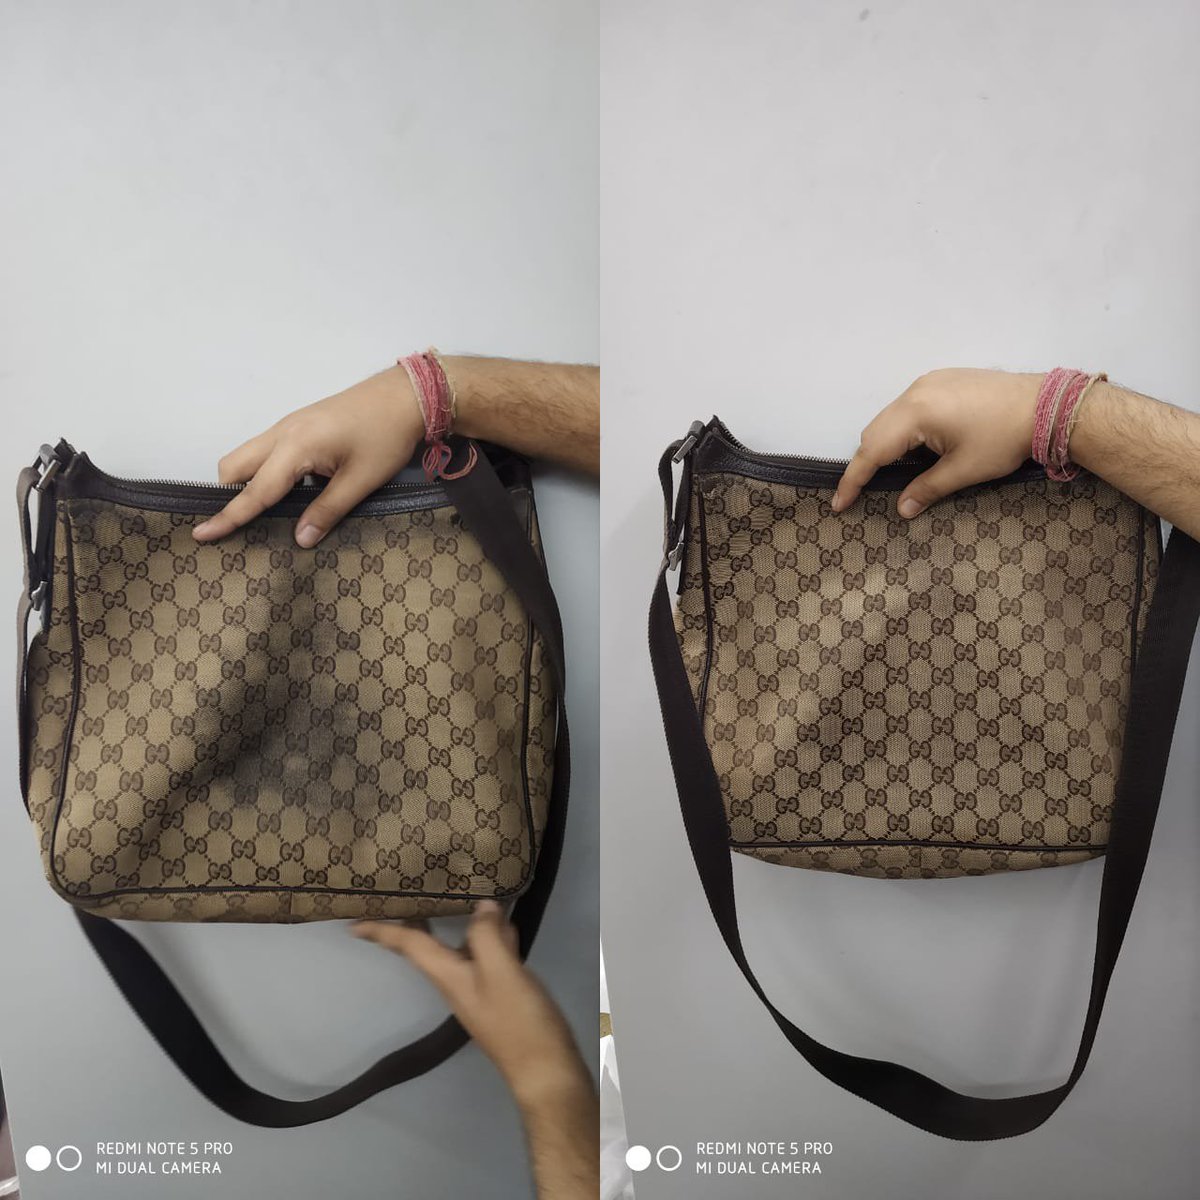 how to clean gucci bag